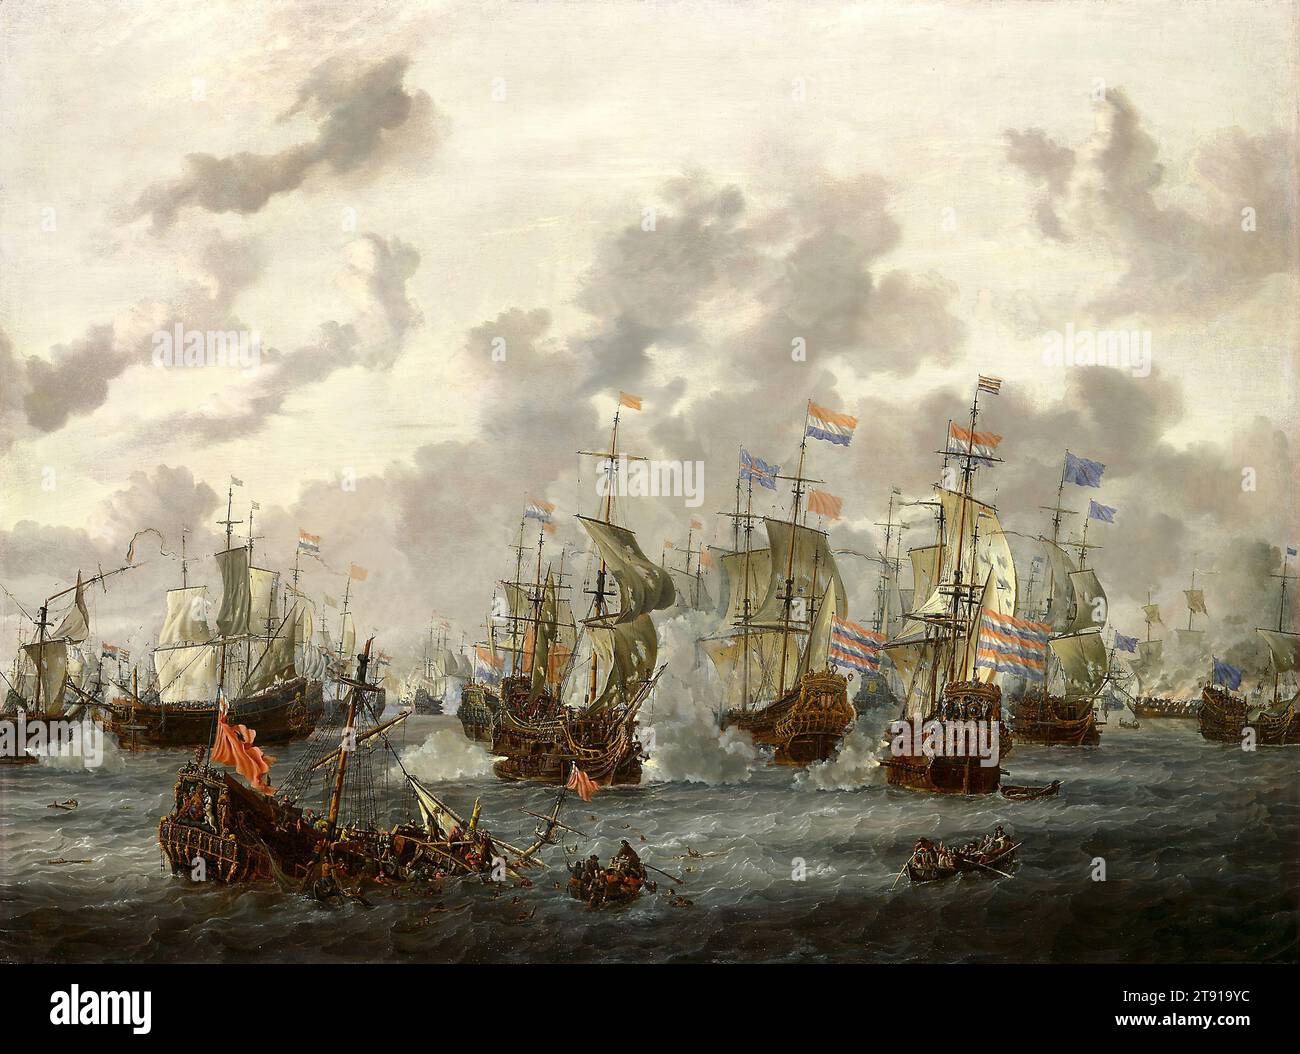 The Four Days’ Battle, 1666, Abraham Storck, Dutch, 1635–1710, 37 1/2 x 50 1/2 in. (95.25 x 128.27 cm) (canvas), Oil on canvas, Netherlands, 17th century, This patriotic scene chronicles the Four Days' Battle (June 11-14, 1666) between the Dutch and the British fleets in the English Channel. The Dutch squadron's two principal ships, the Gouda and the Spiegel, appear toward the center of the composition. This battle, one of several naval engagements during the protracted trade wars between these two countries, ended favorably for the Dutch. The British fleet sustained the loss of 8,000 men Stock Photo